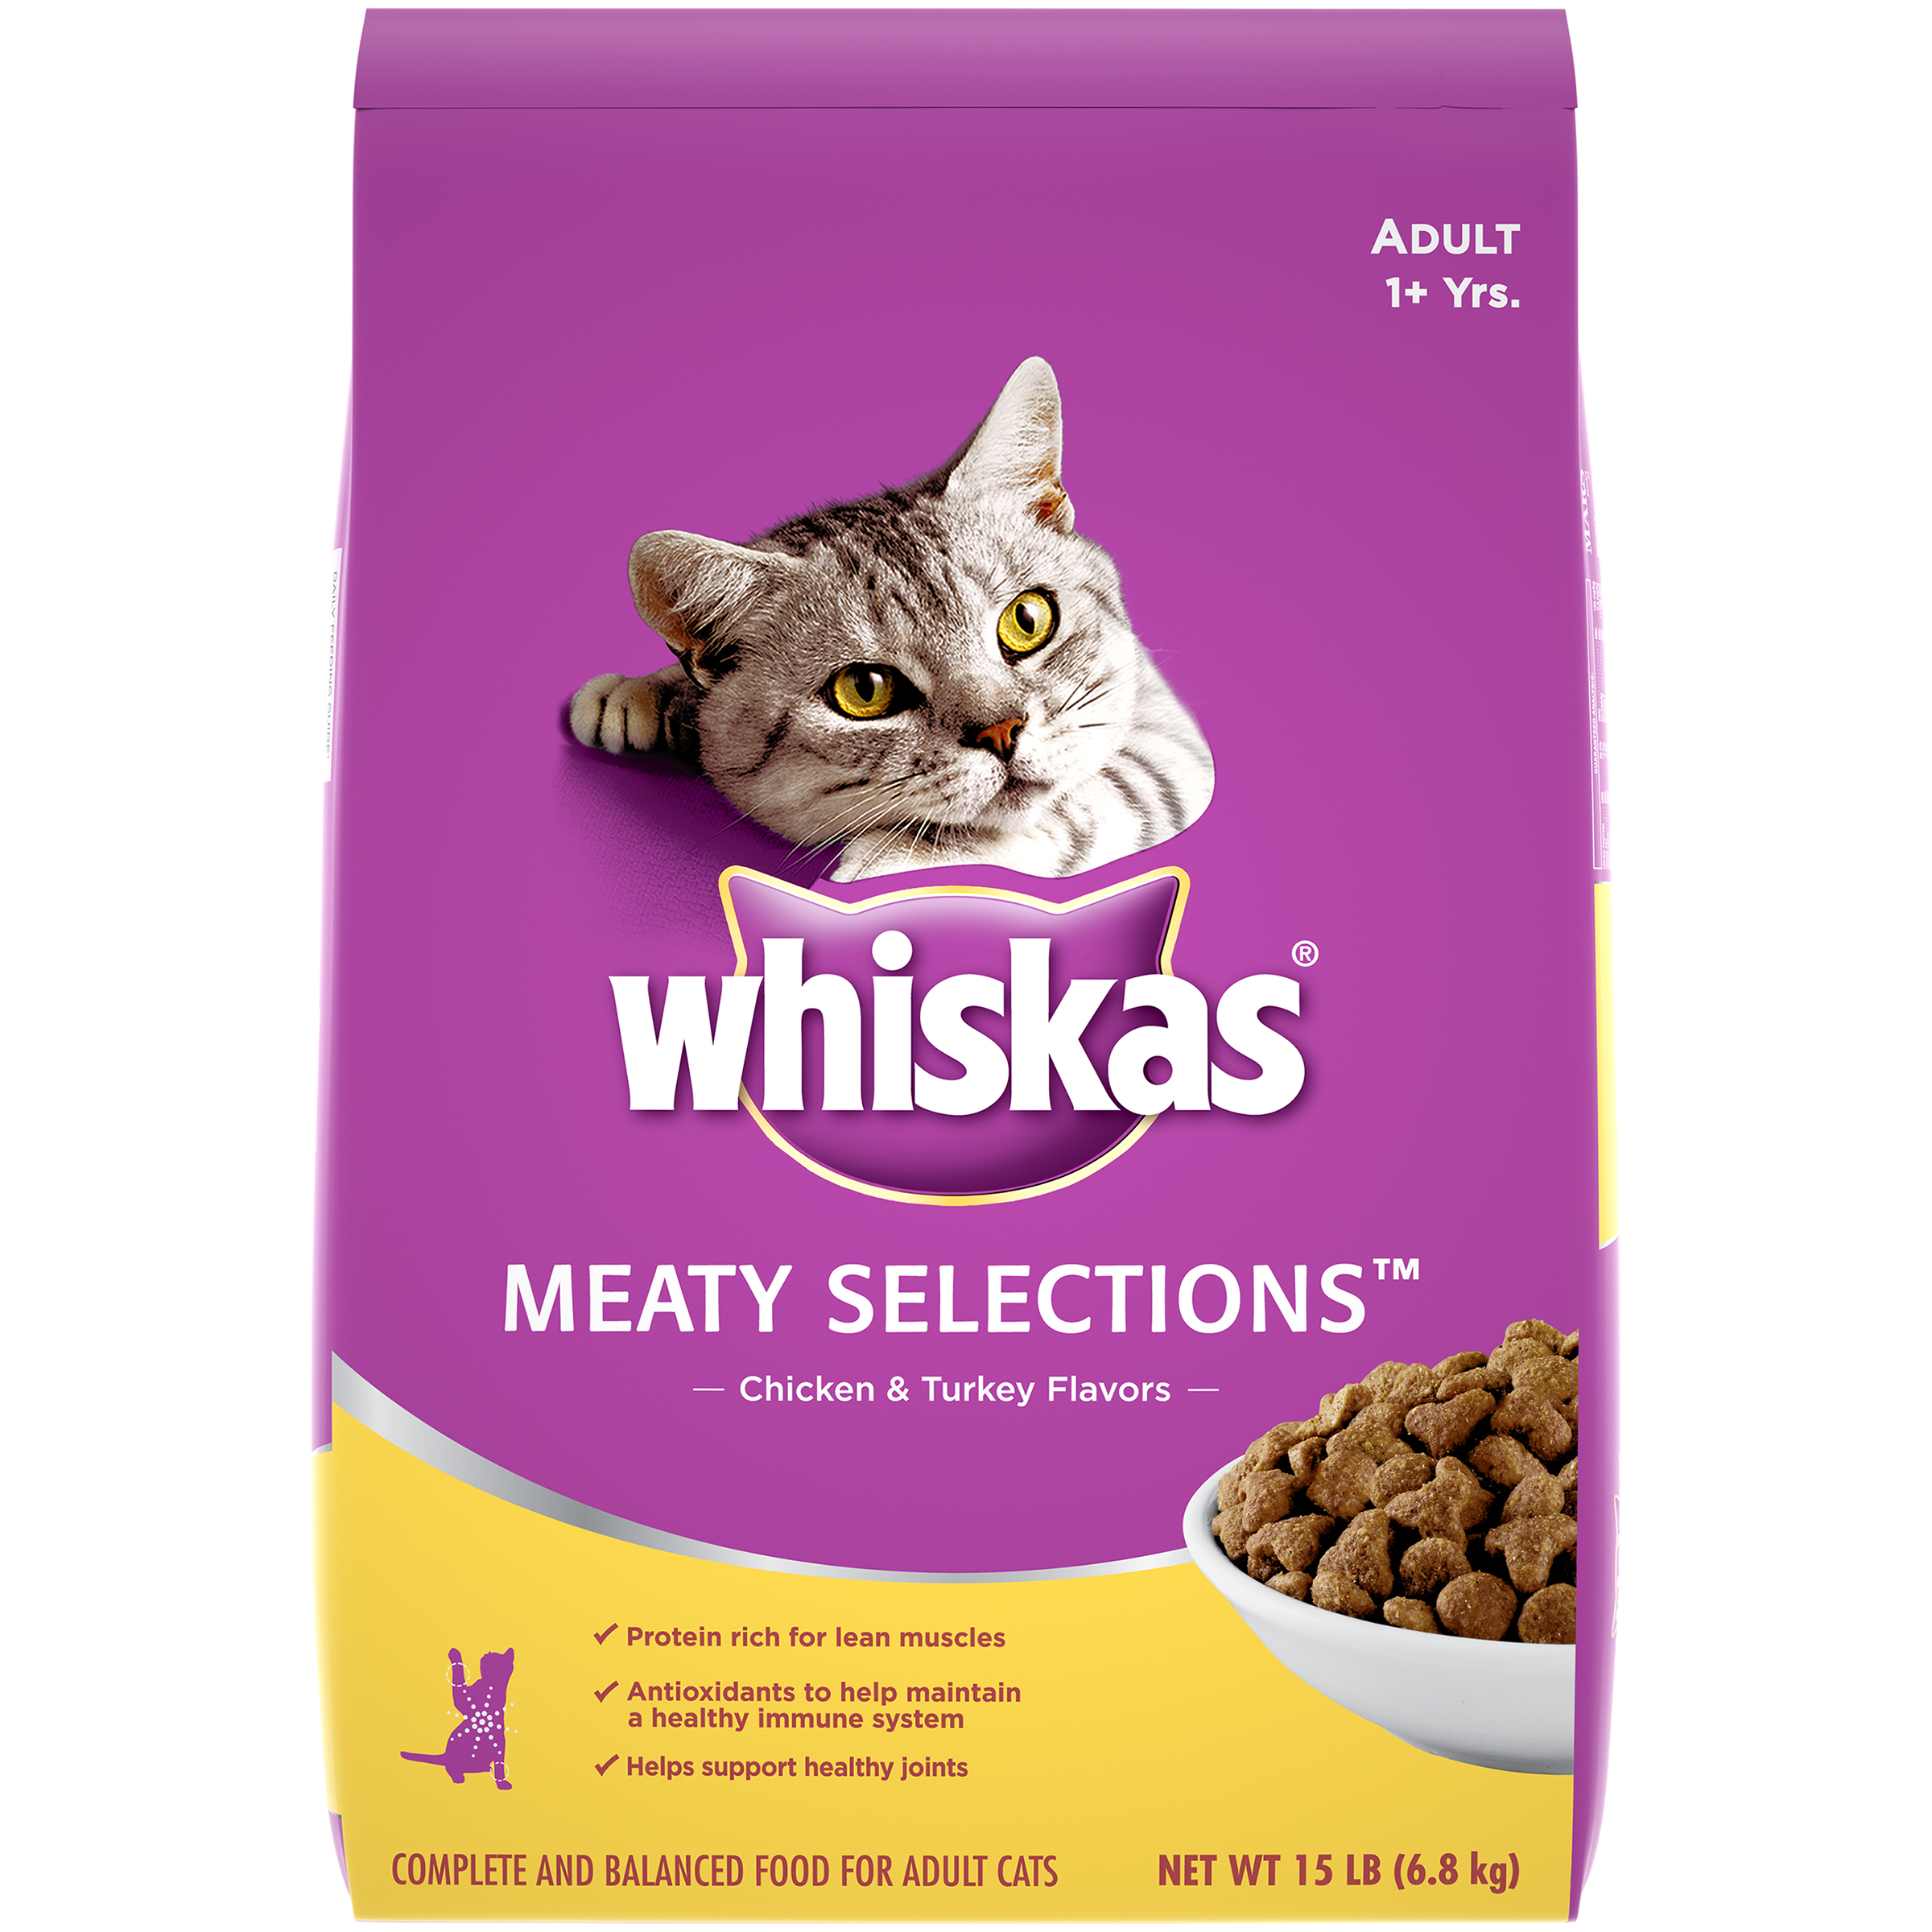 Whiskas Dry Cat Food Meaty Selections Chicken & Turkey 15 lb. Bag Pet